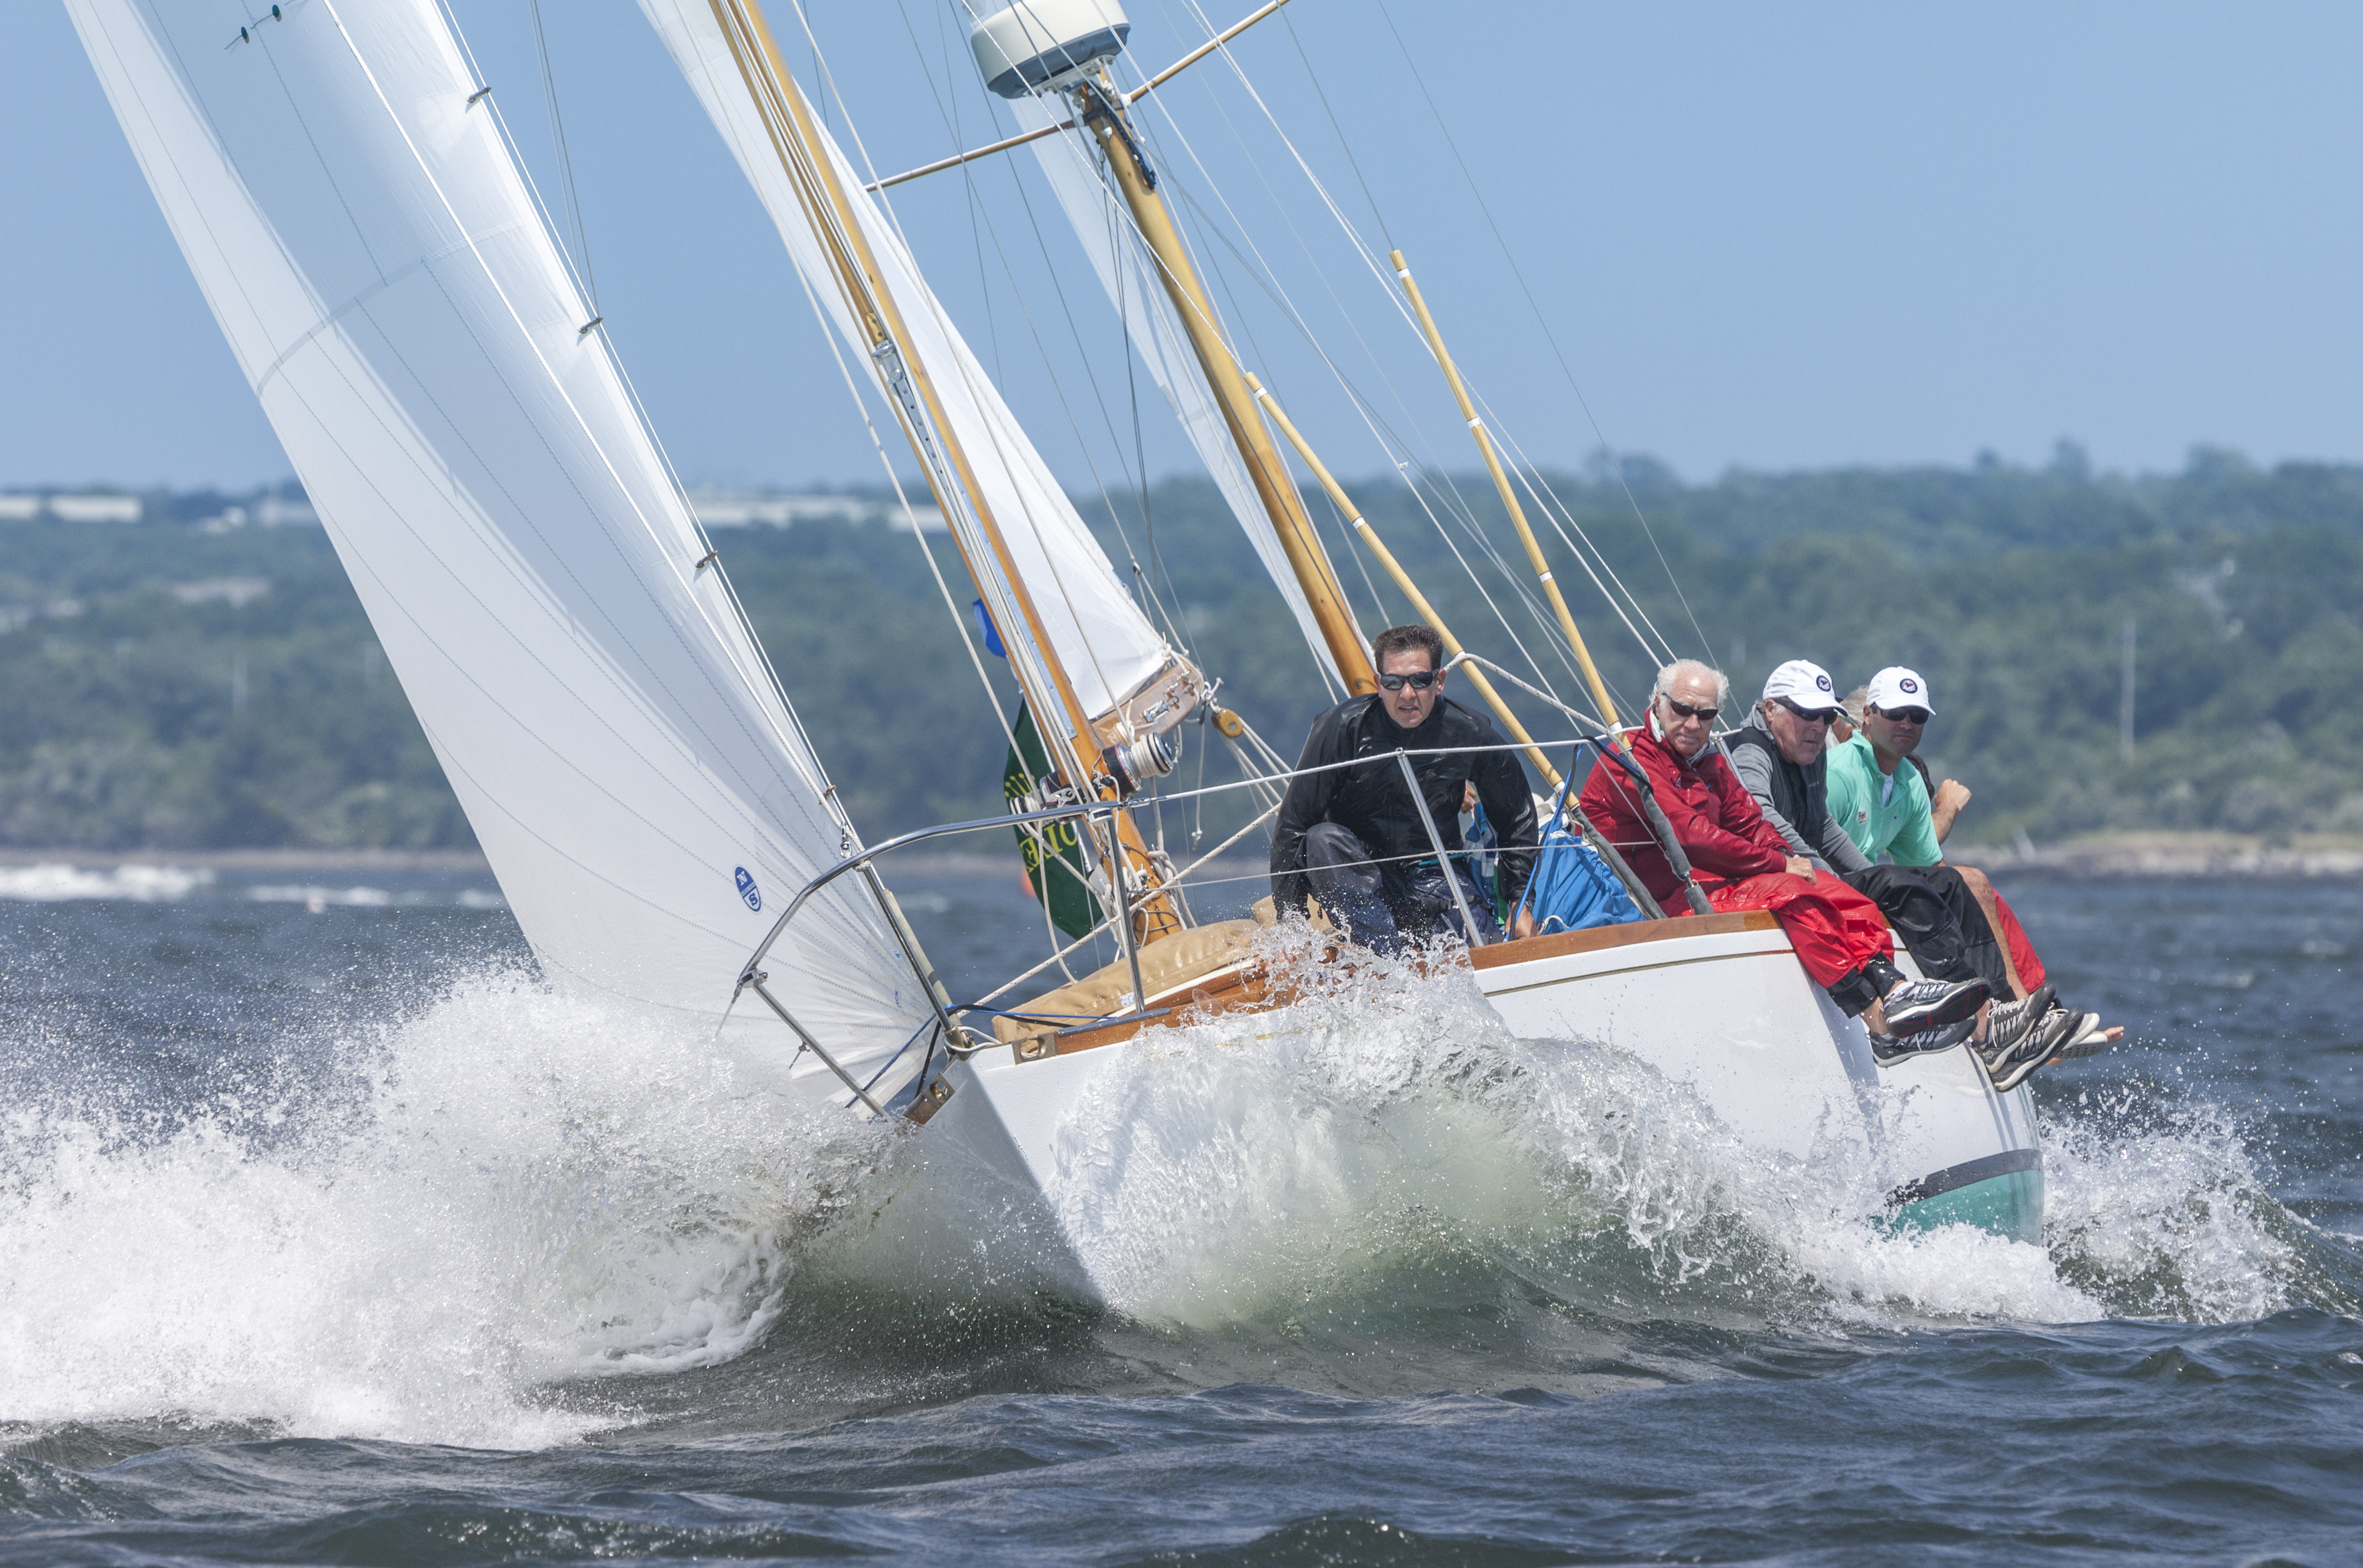 New York Yacht Club Race Week at Newport presented by Rolex 2014